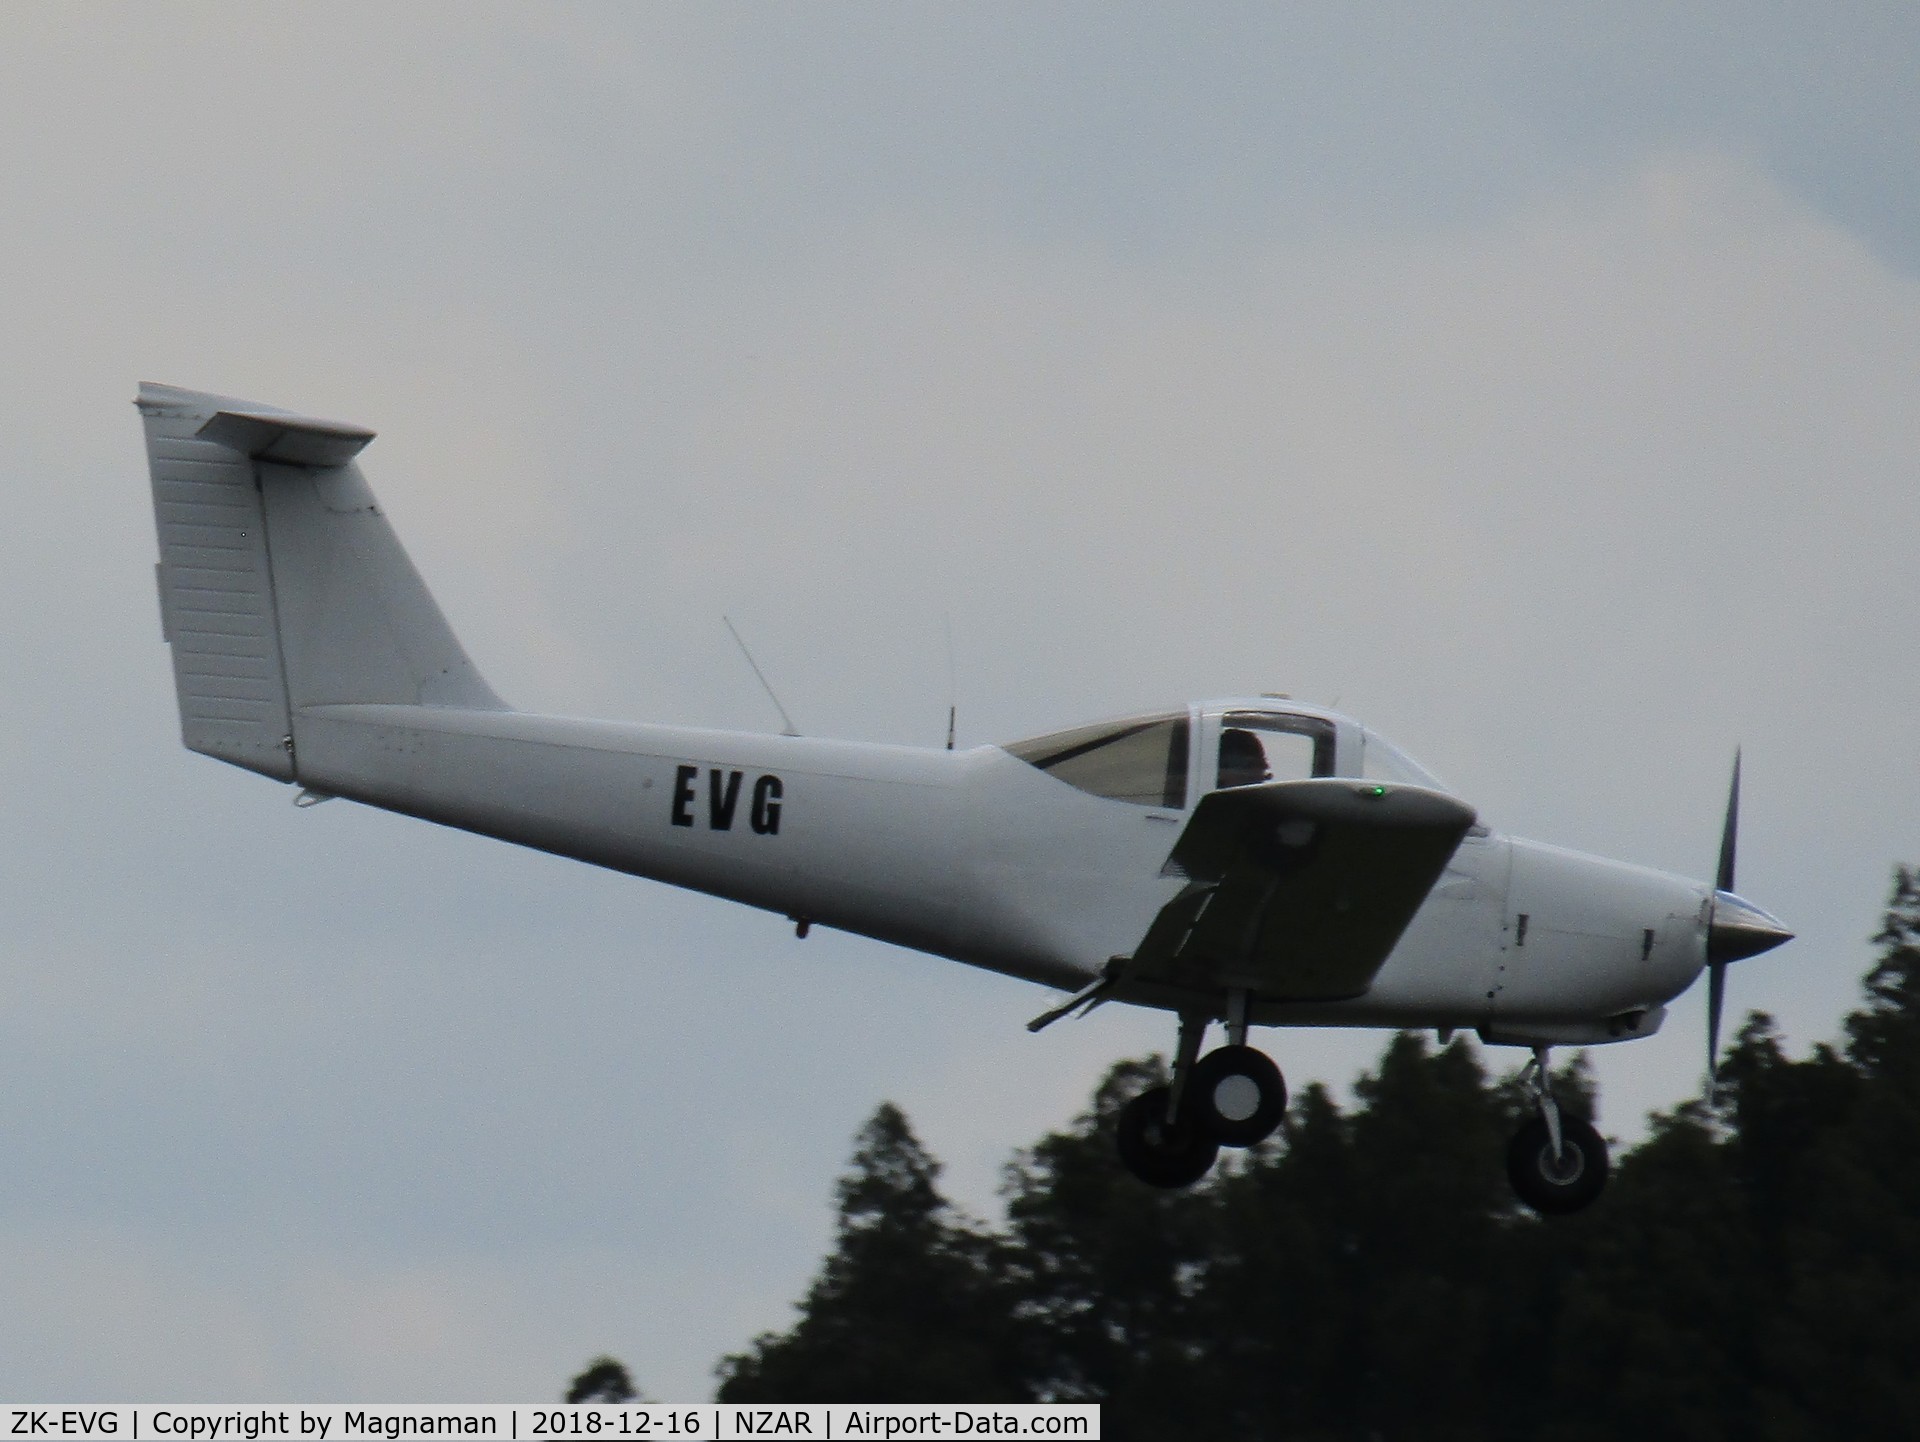 ZK-EVG, Piper PA-38-112 Tomahawk C/N 38-82A0015, landing at ardmore